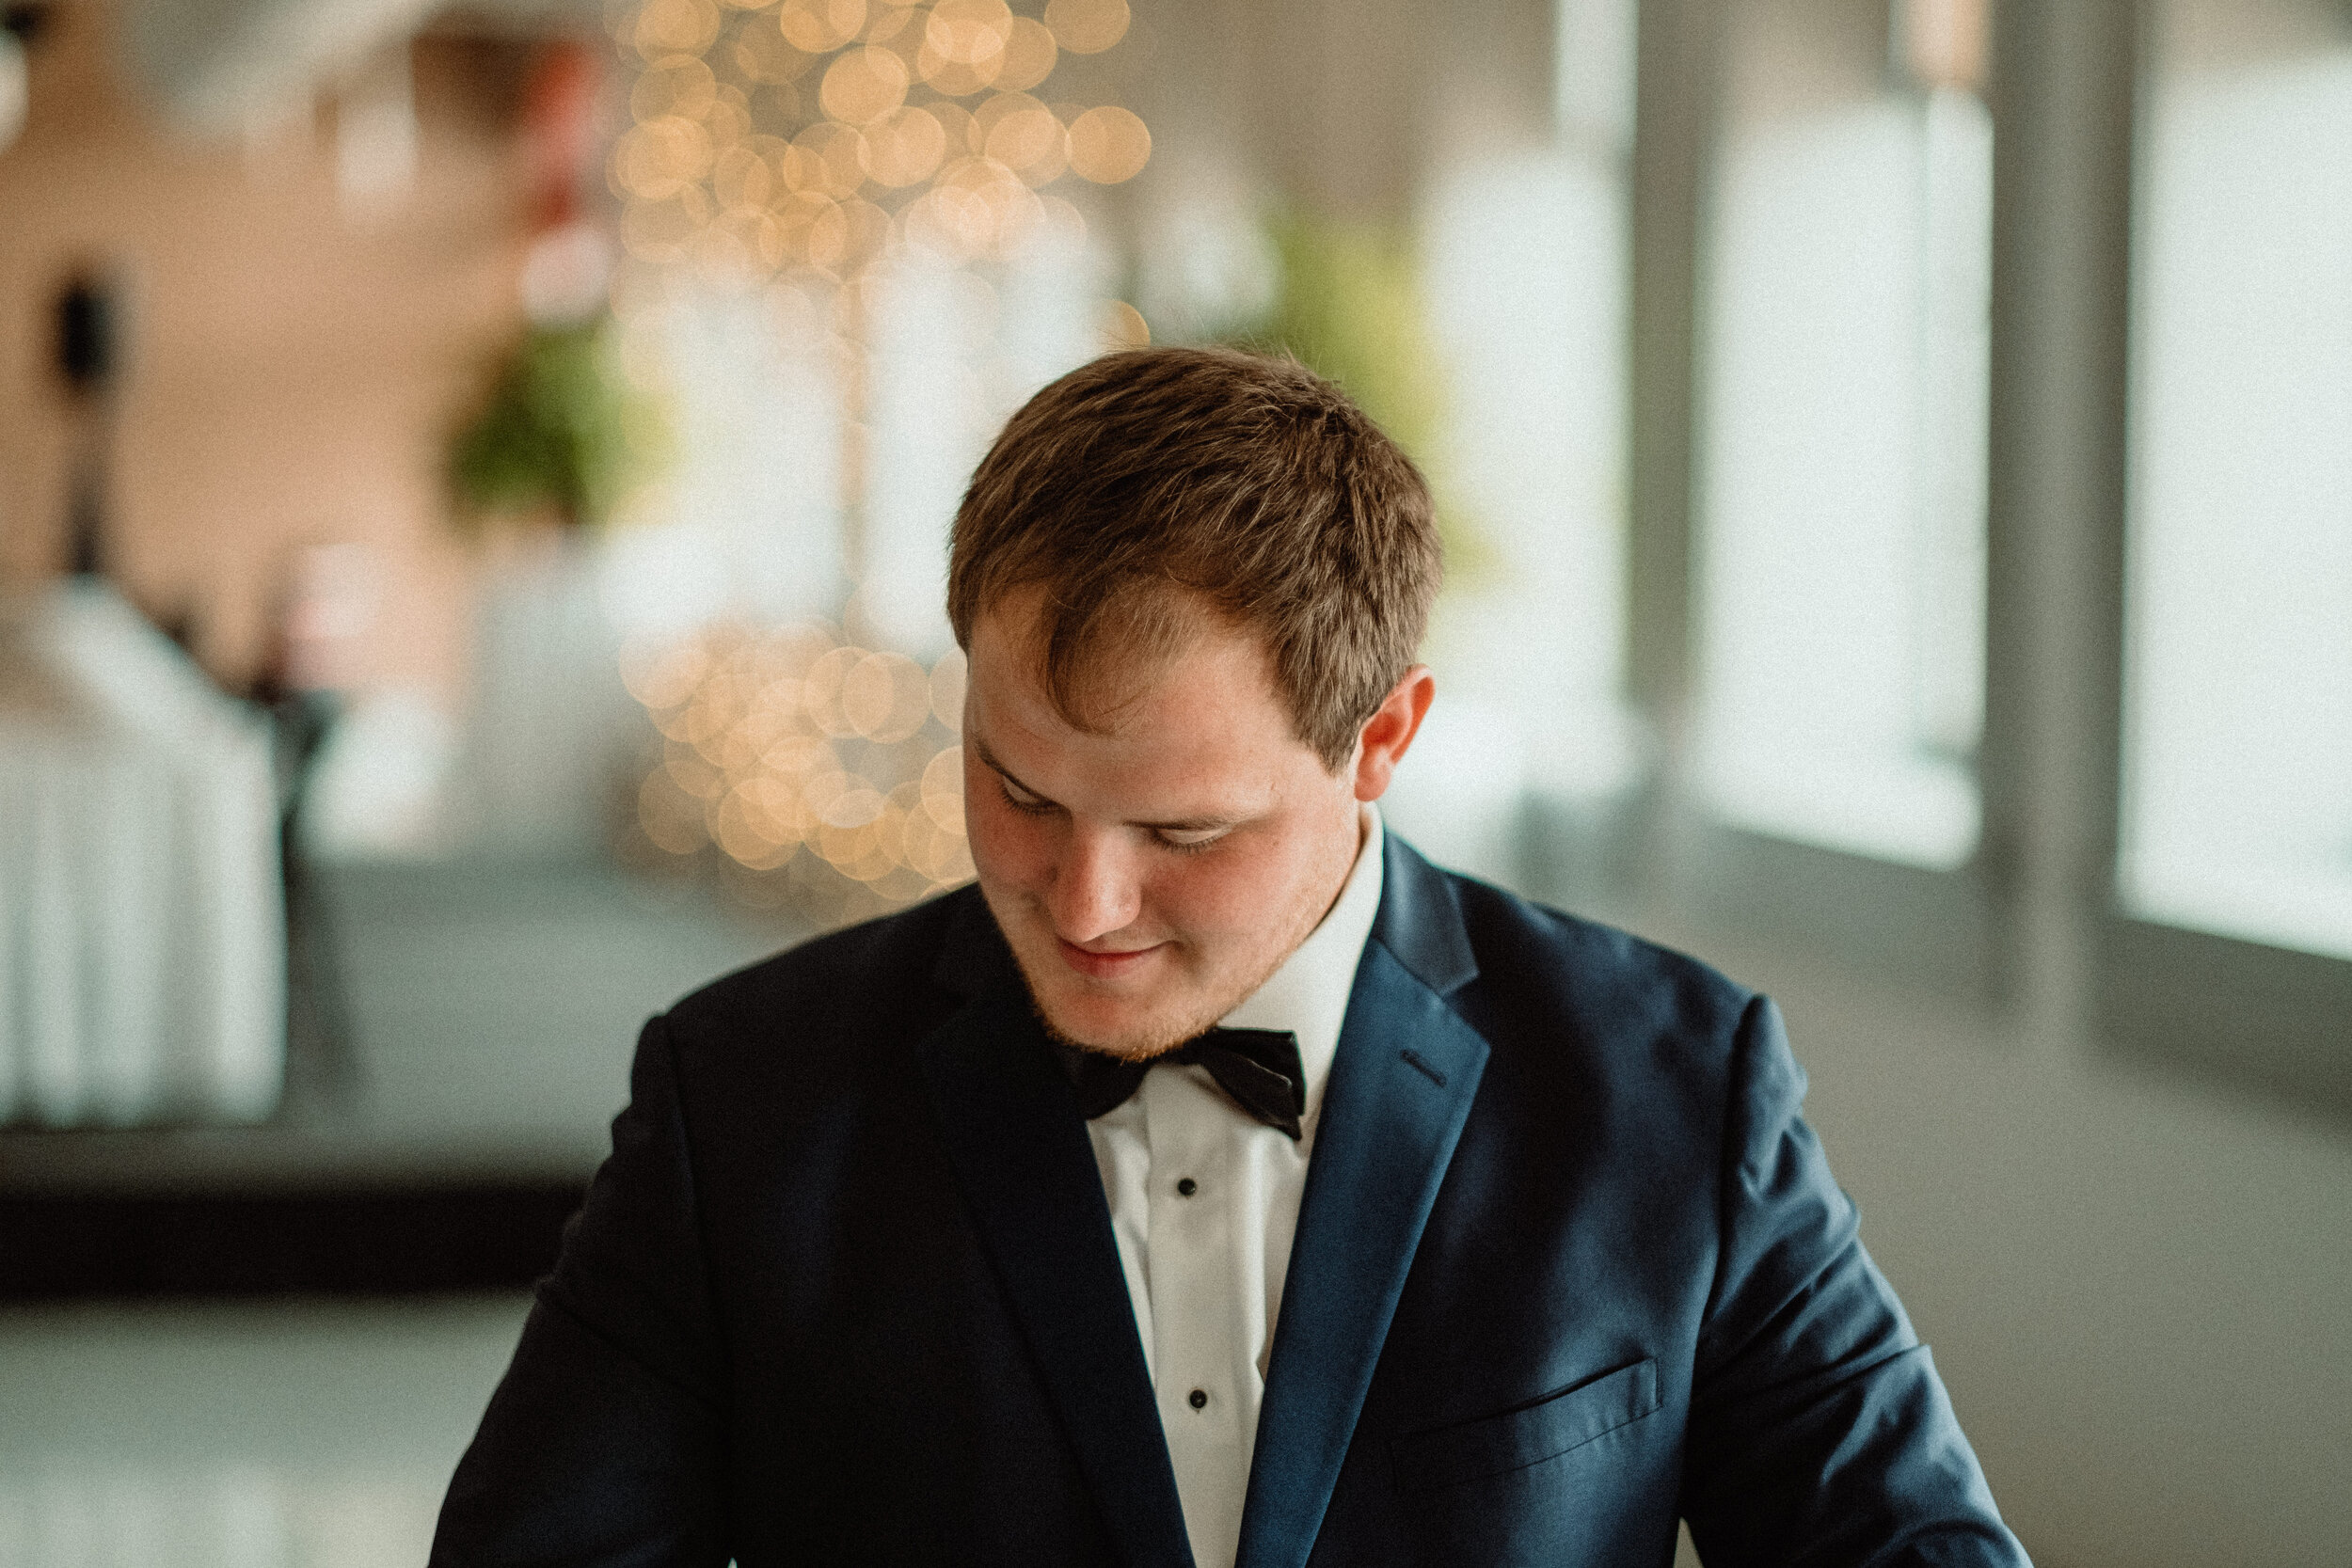 Groom at Maytag Event Center